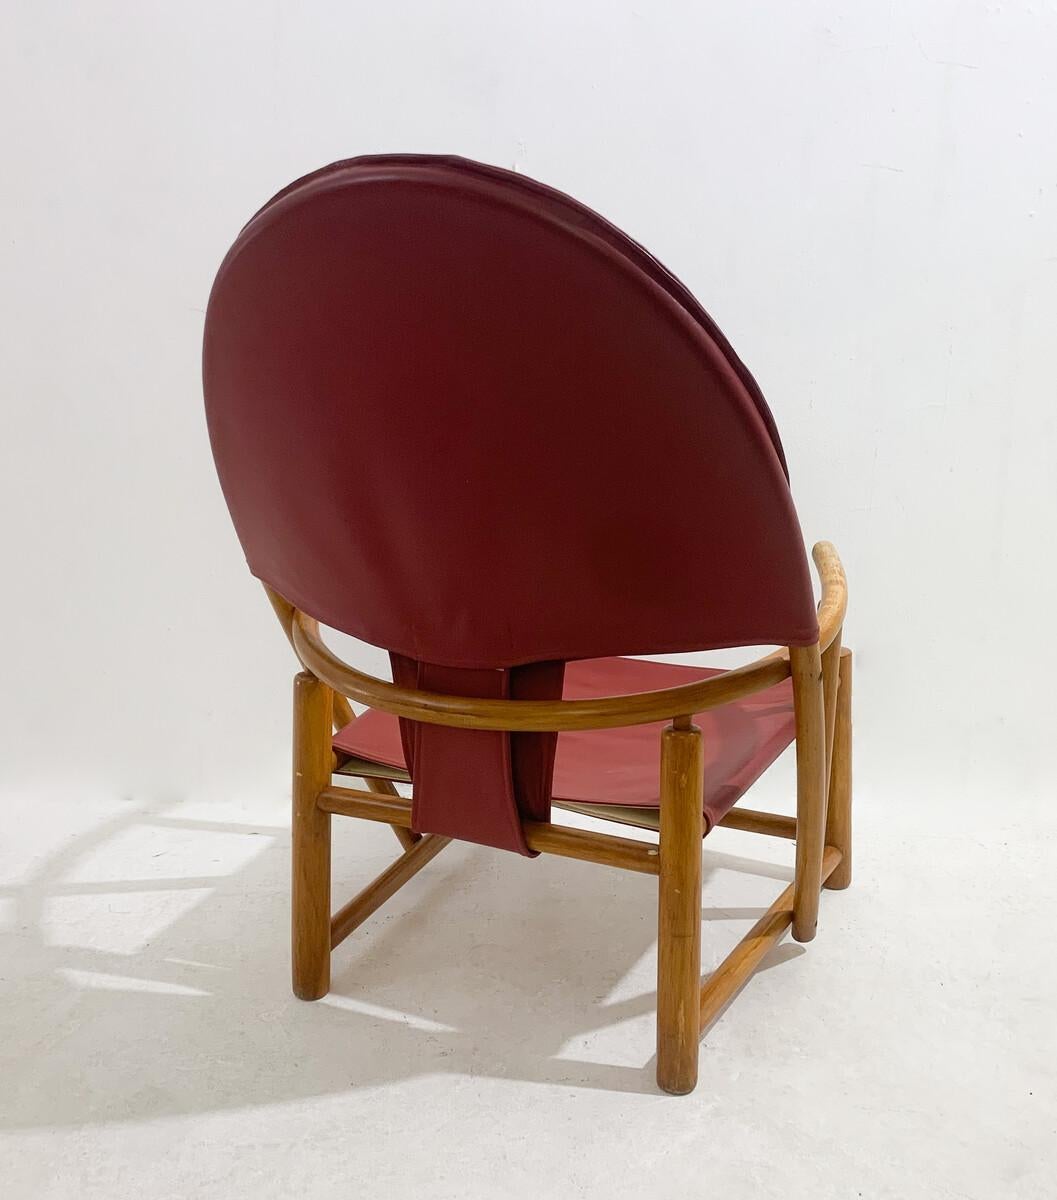 Leather Red G23 Hoop Armchair by Piero Palange & Werther Toffoloni, 1970s For Sale